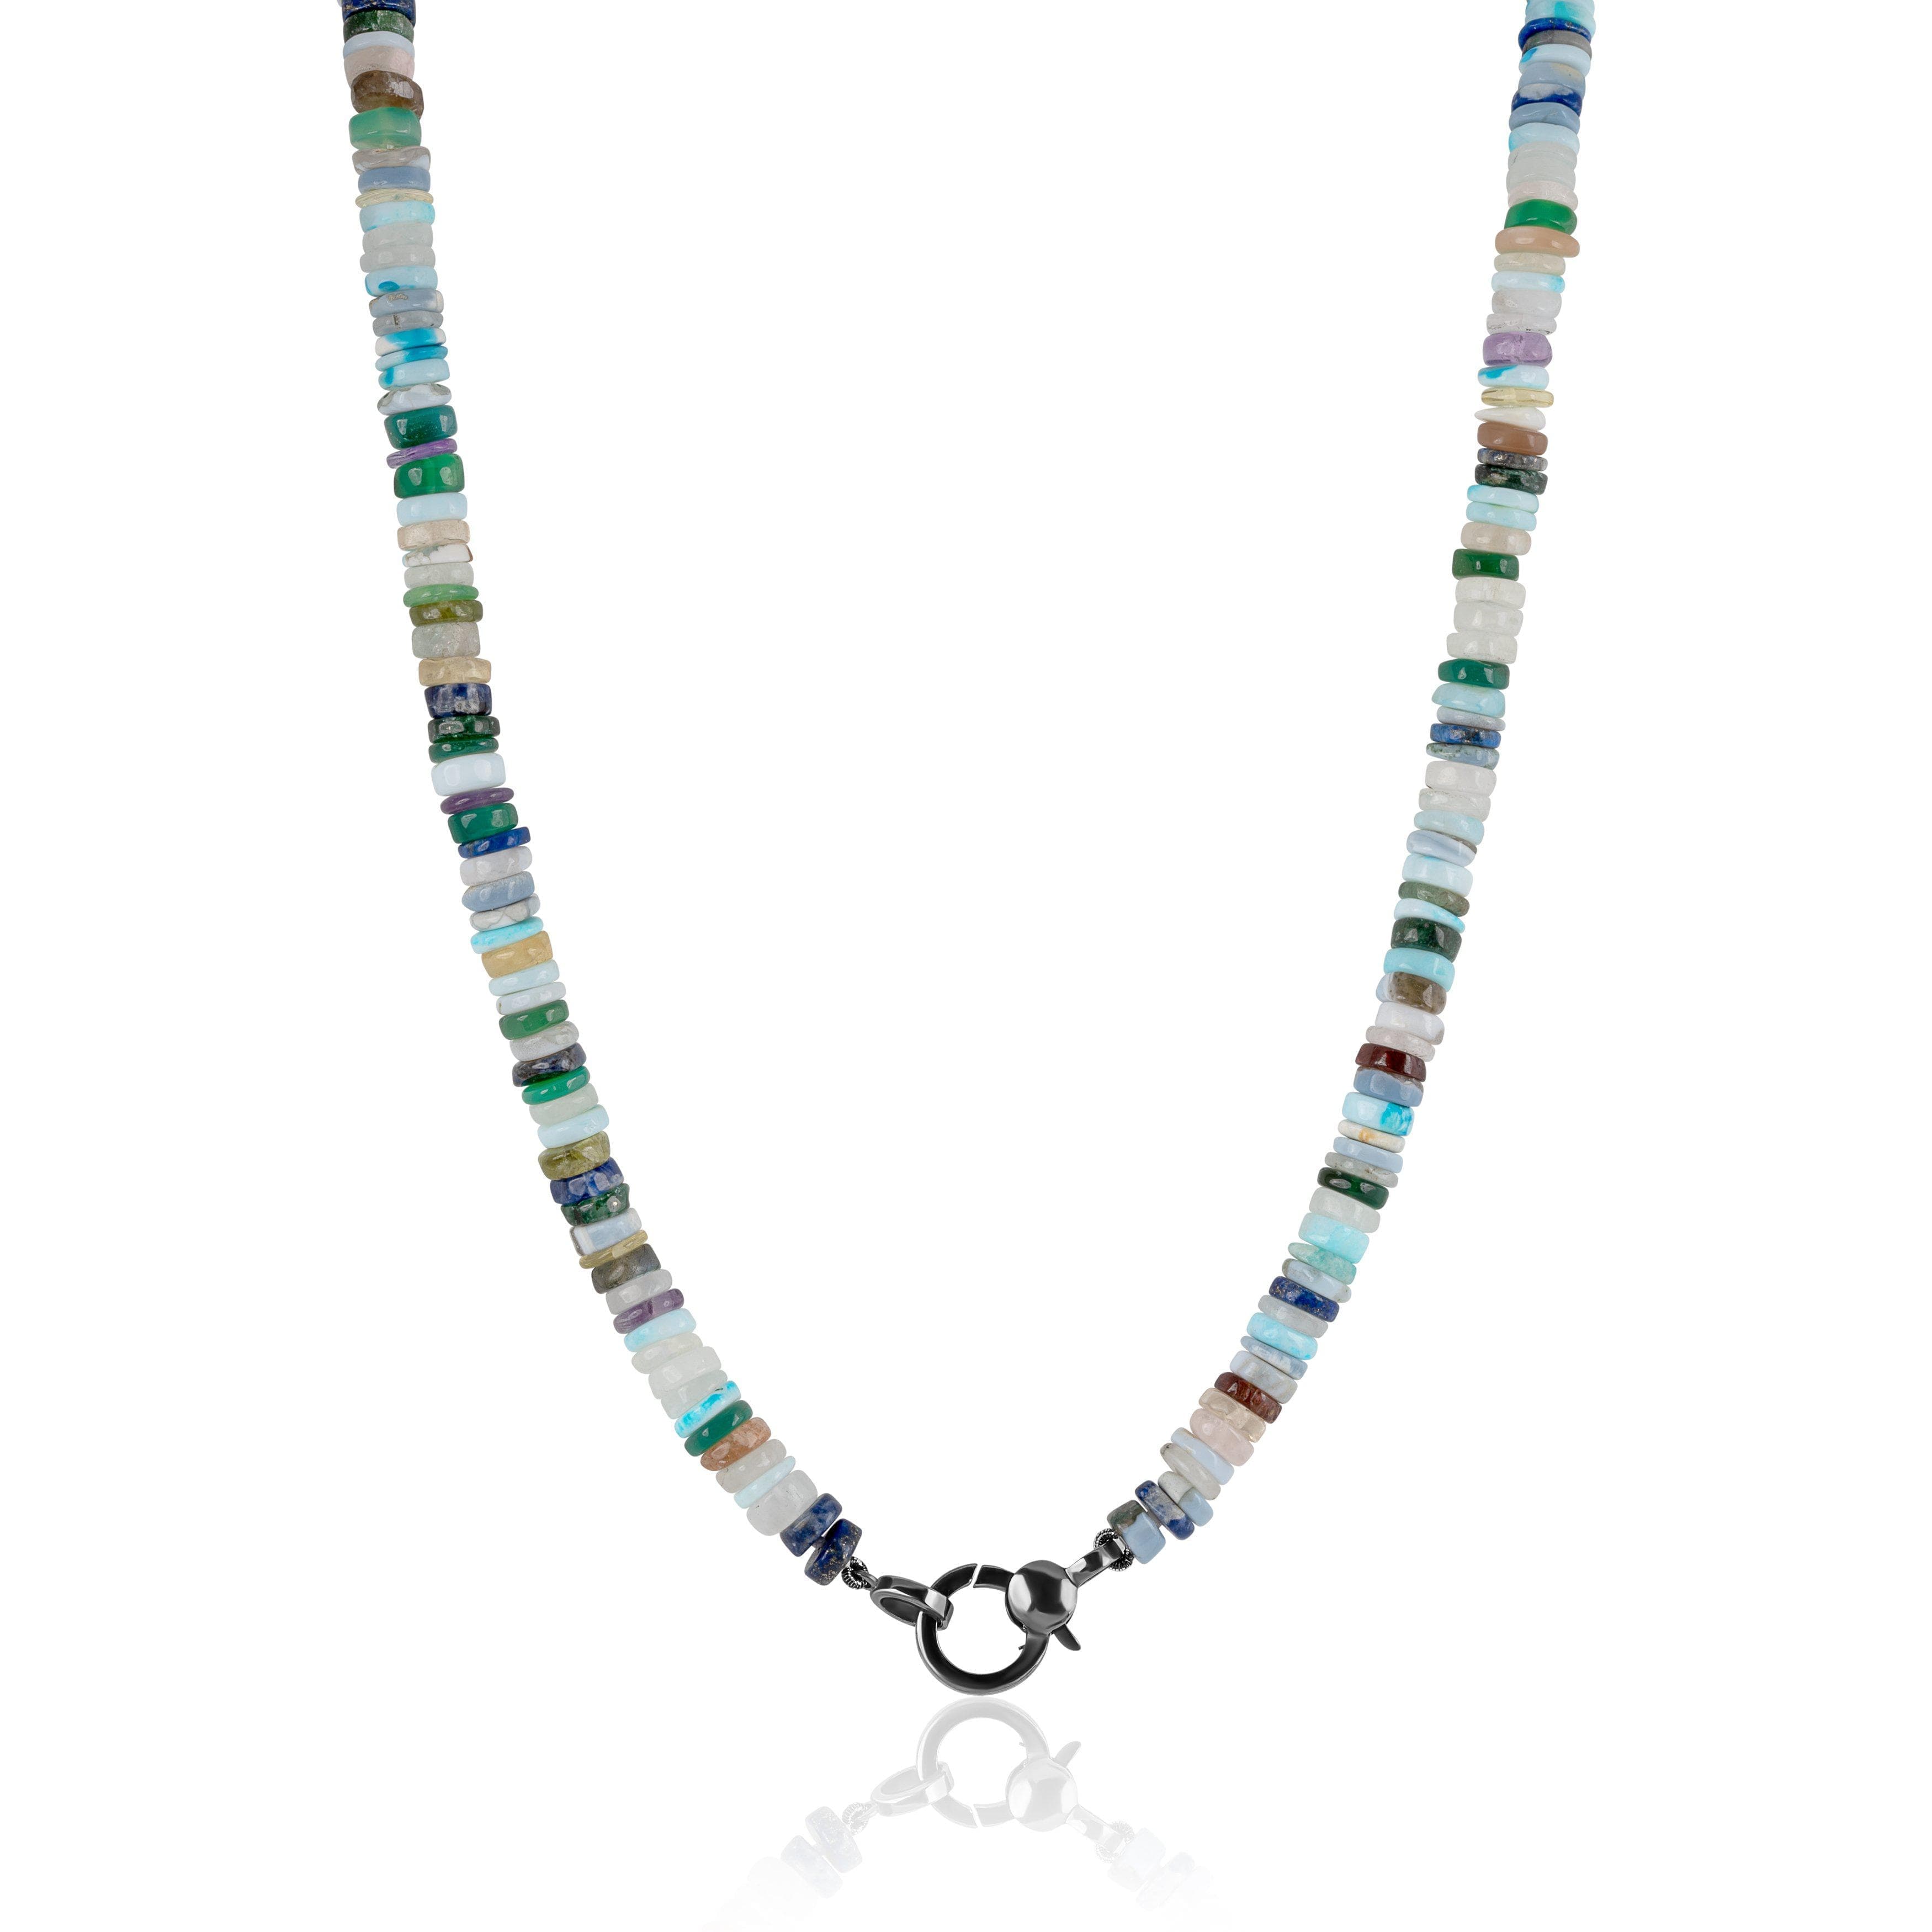 Rock Candy Necklace – Jose Balli | New Orleans